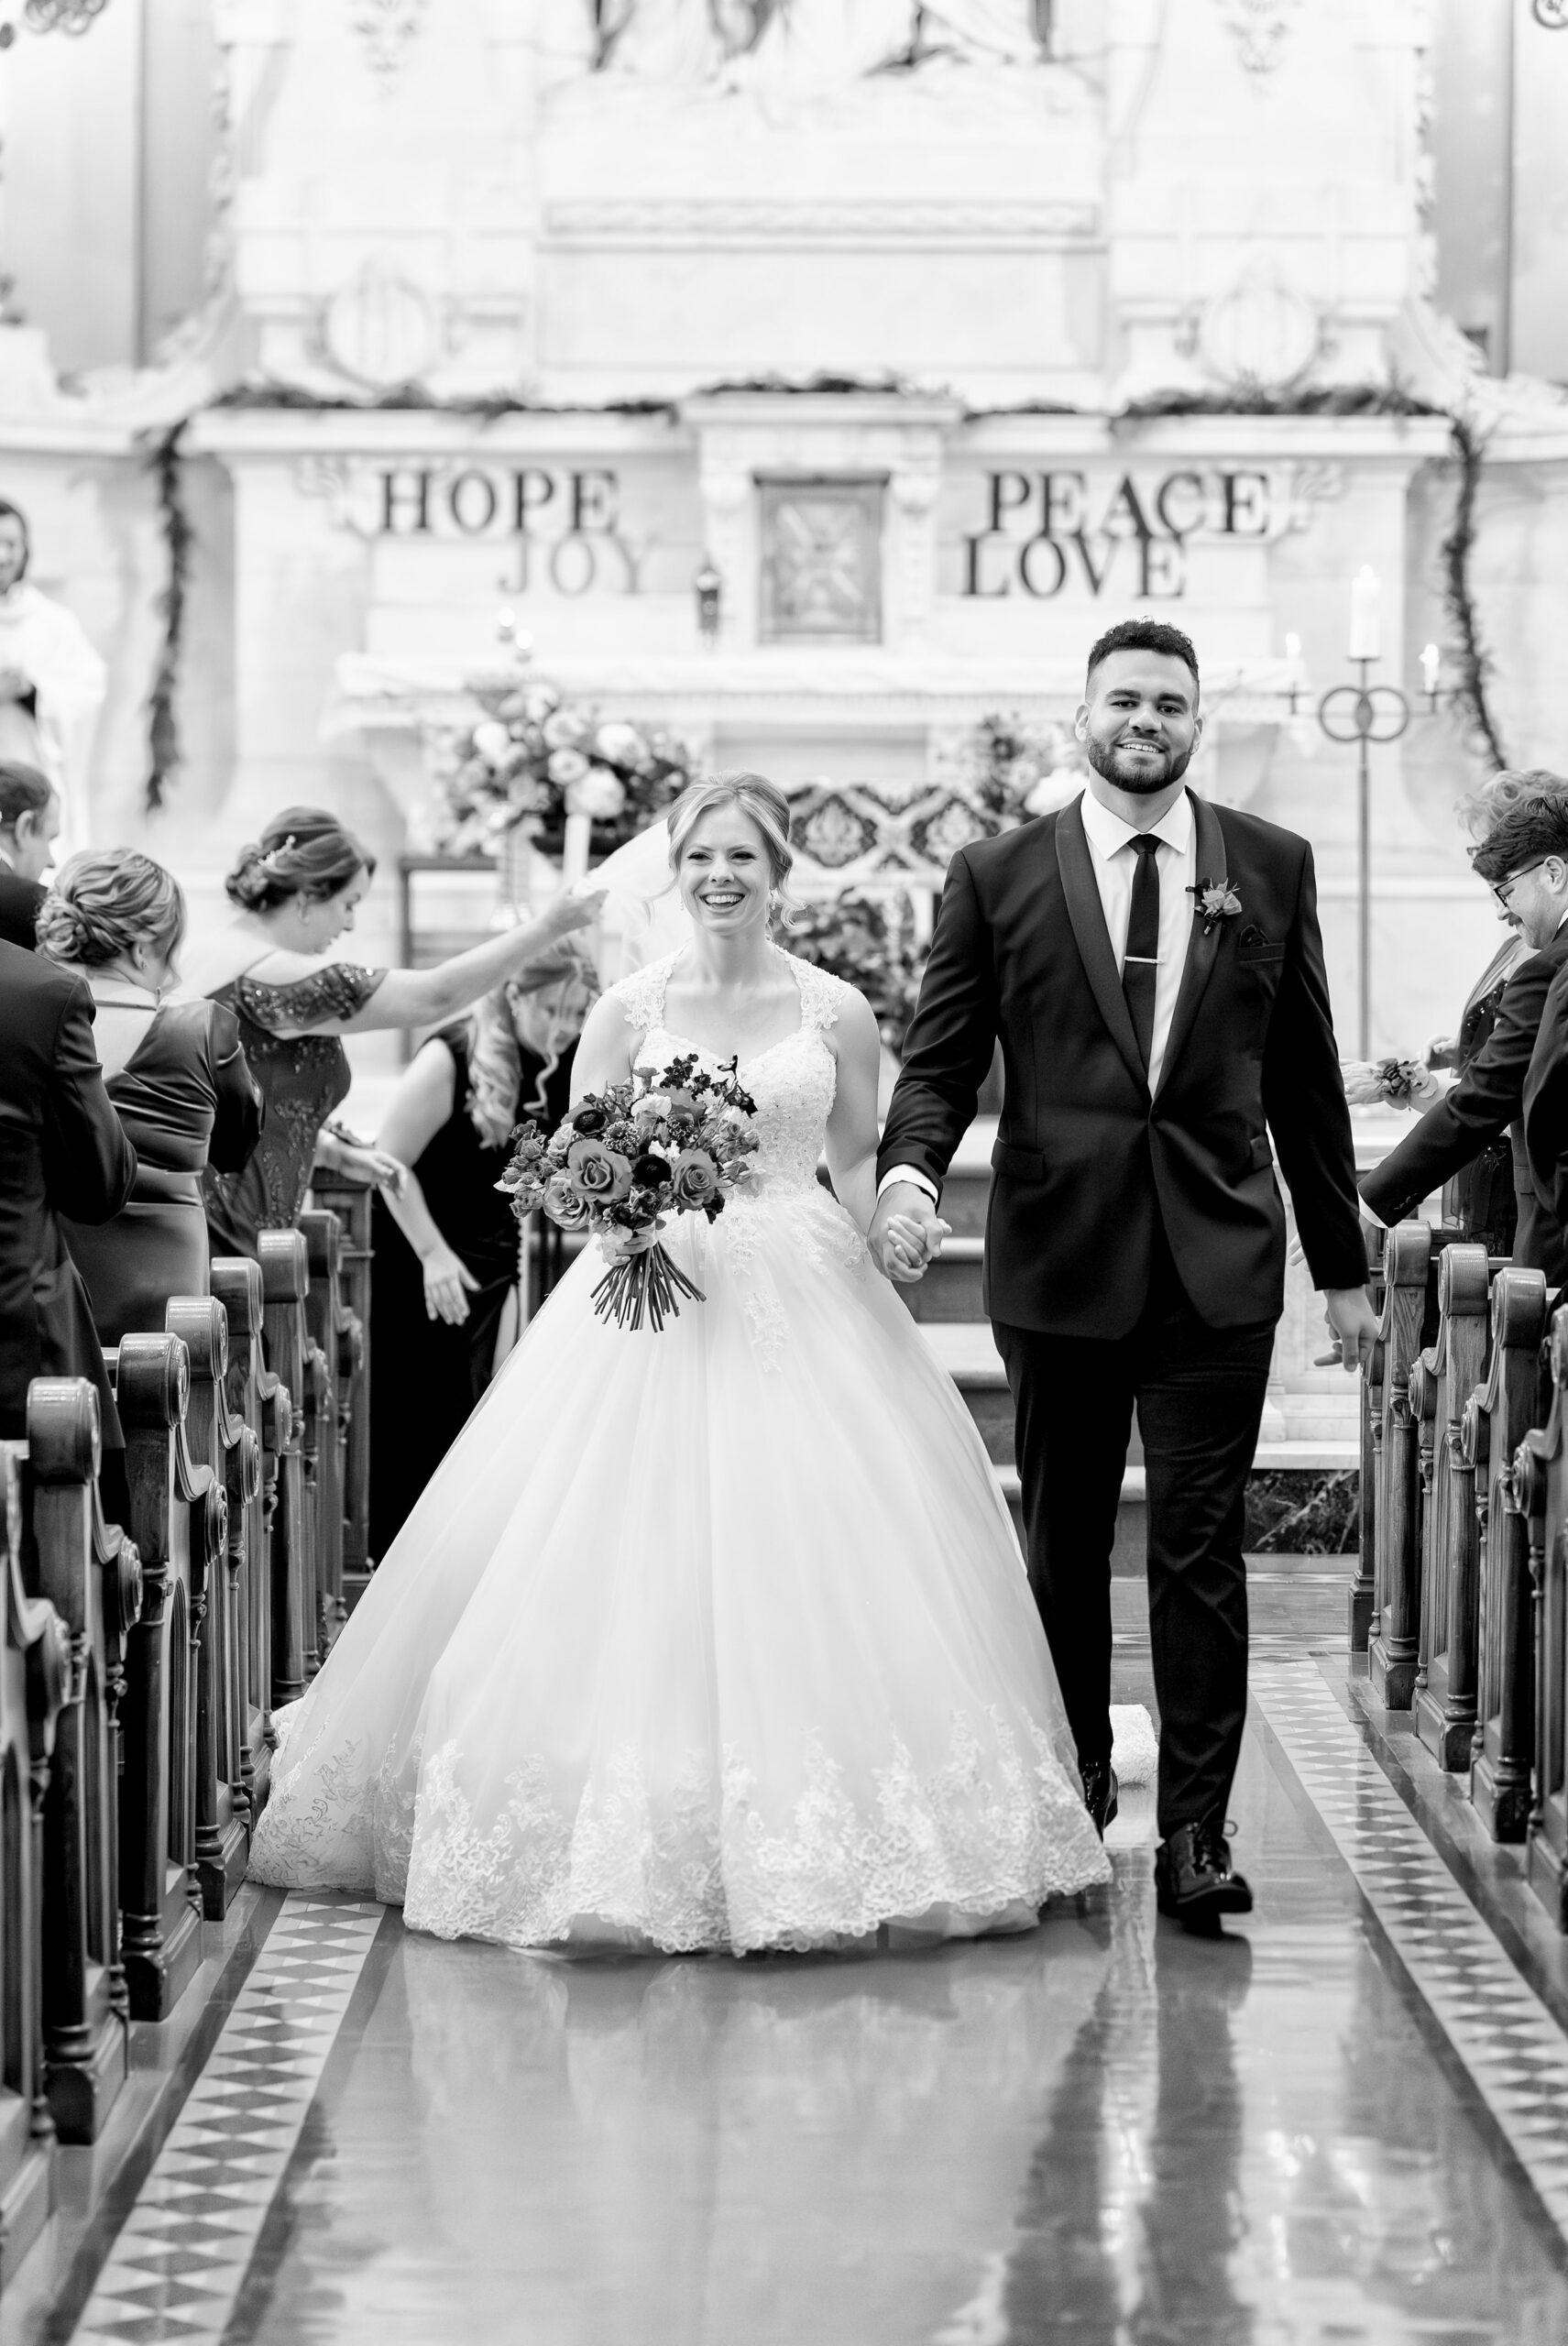 A bride and groom walk down aisle of Sts Peter and Paul Jesuit Church on their wedding day.  